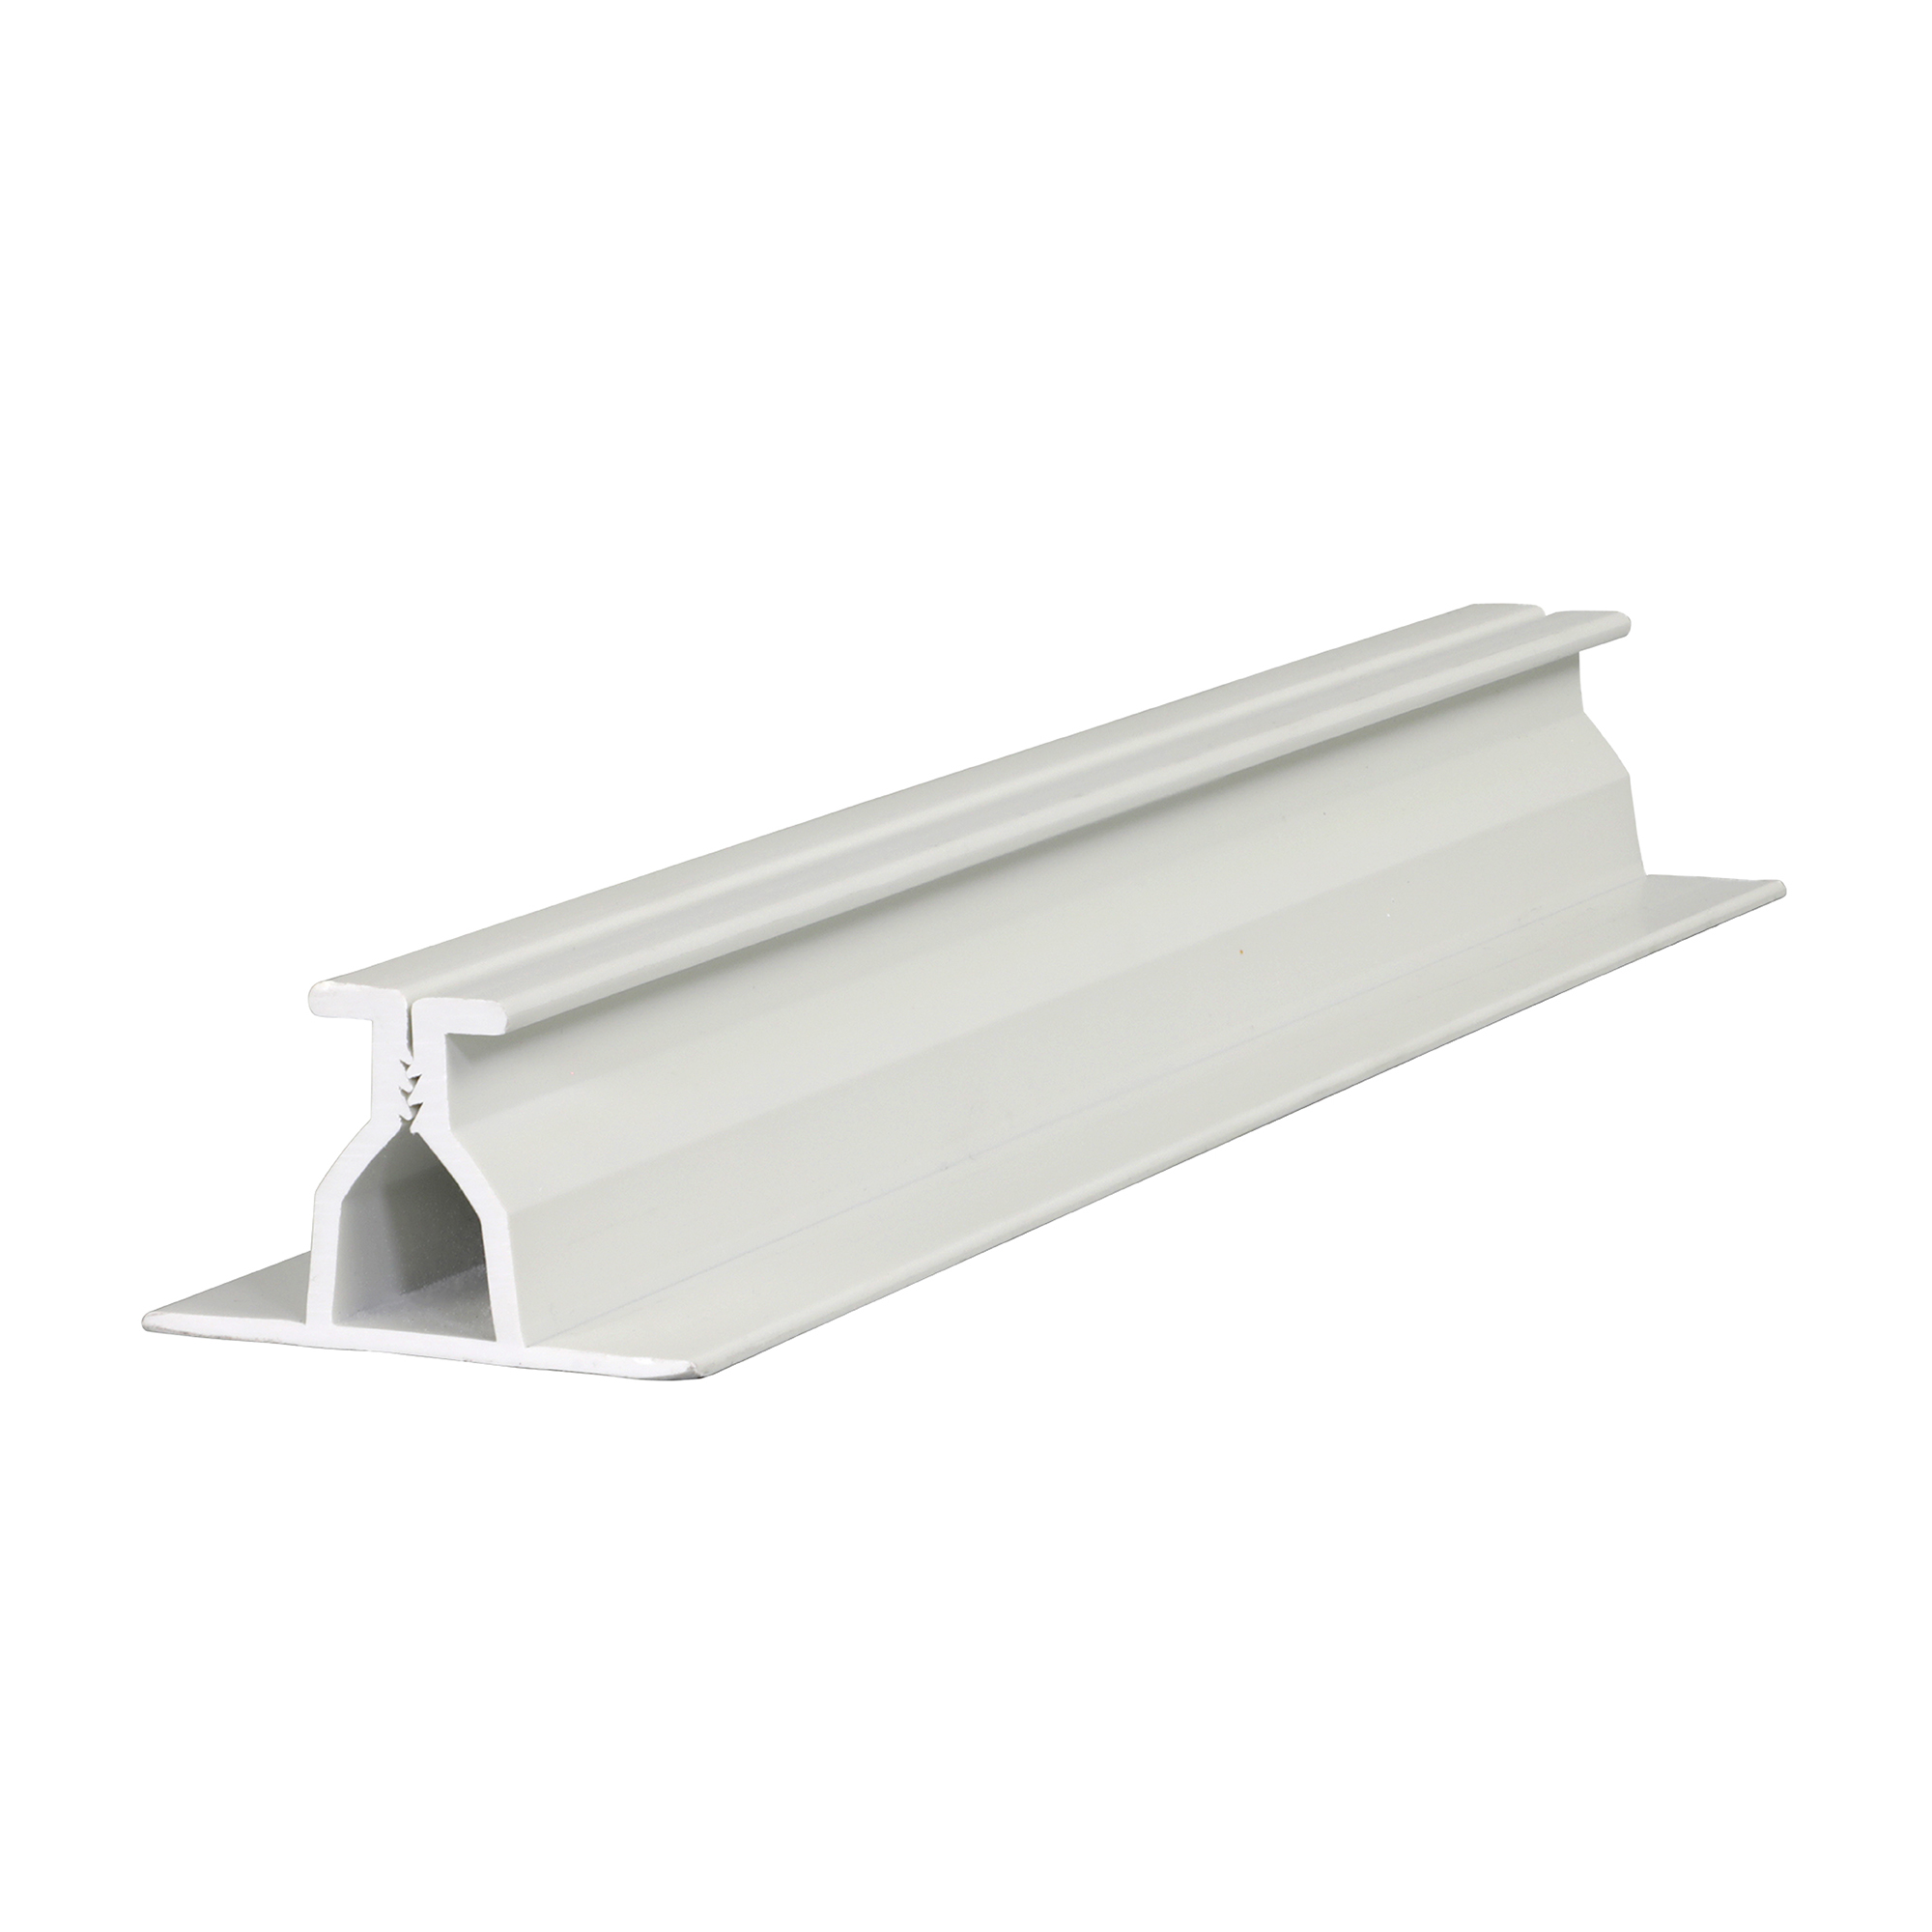 Telascapes Midwall 1inch Upvc White 2000x2000 1